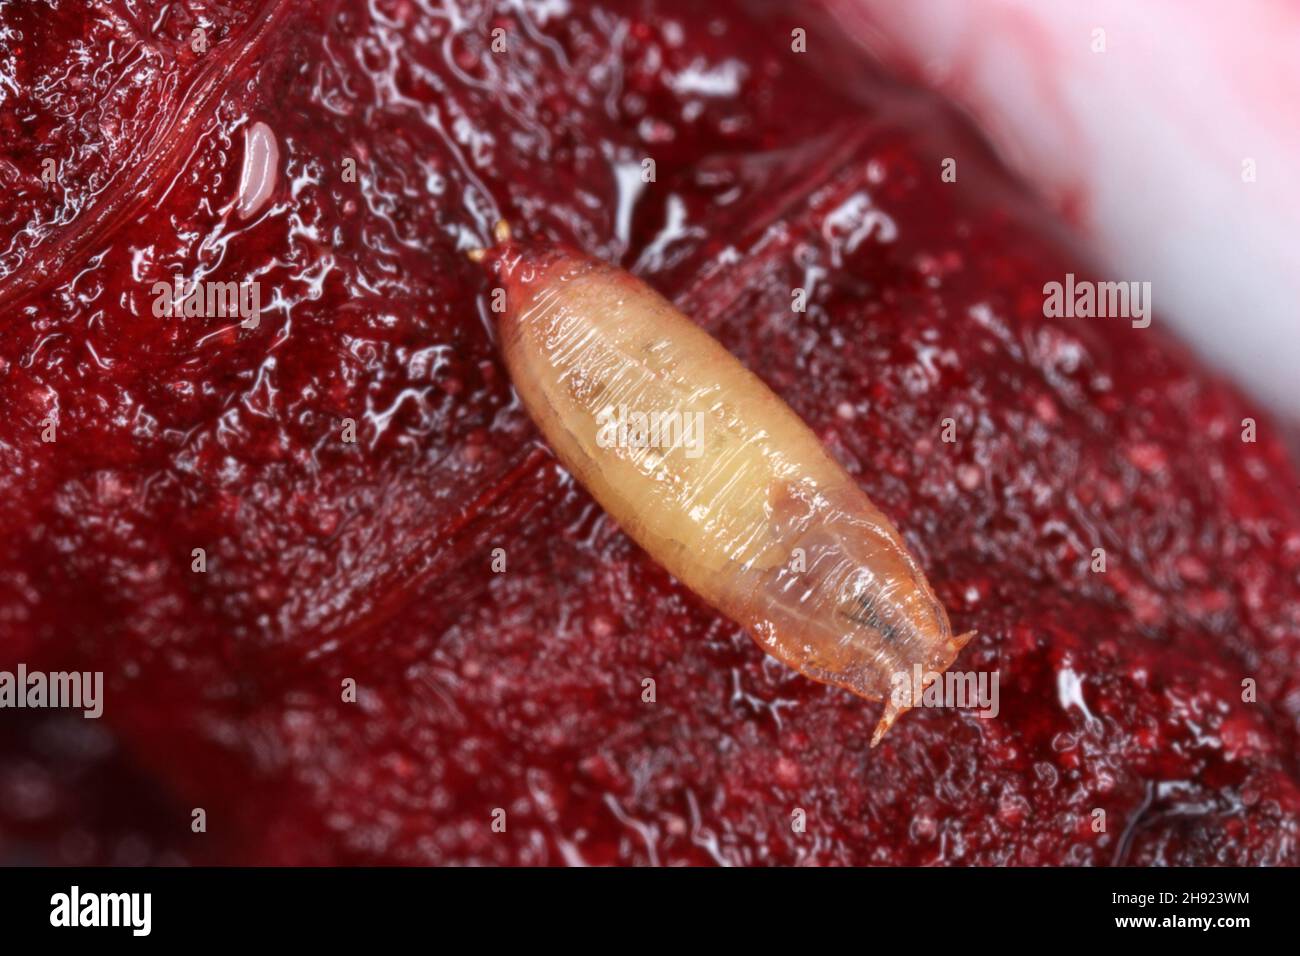 Pupae of common fruit fly or vinegar fly Drosophila melanogaster is a species of fly in the family Drosophilidae. It is pest of fruits. Stock Photo